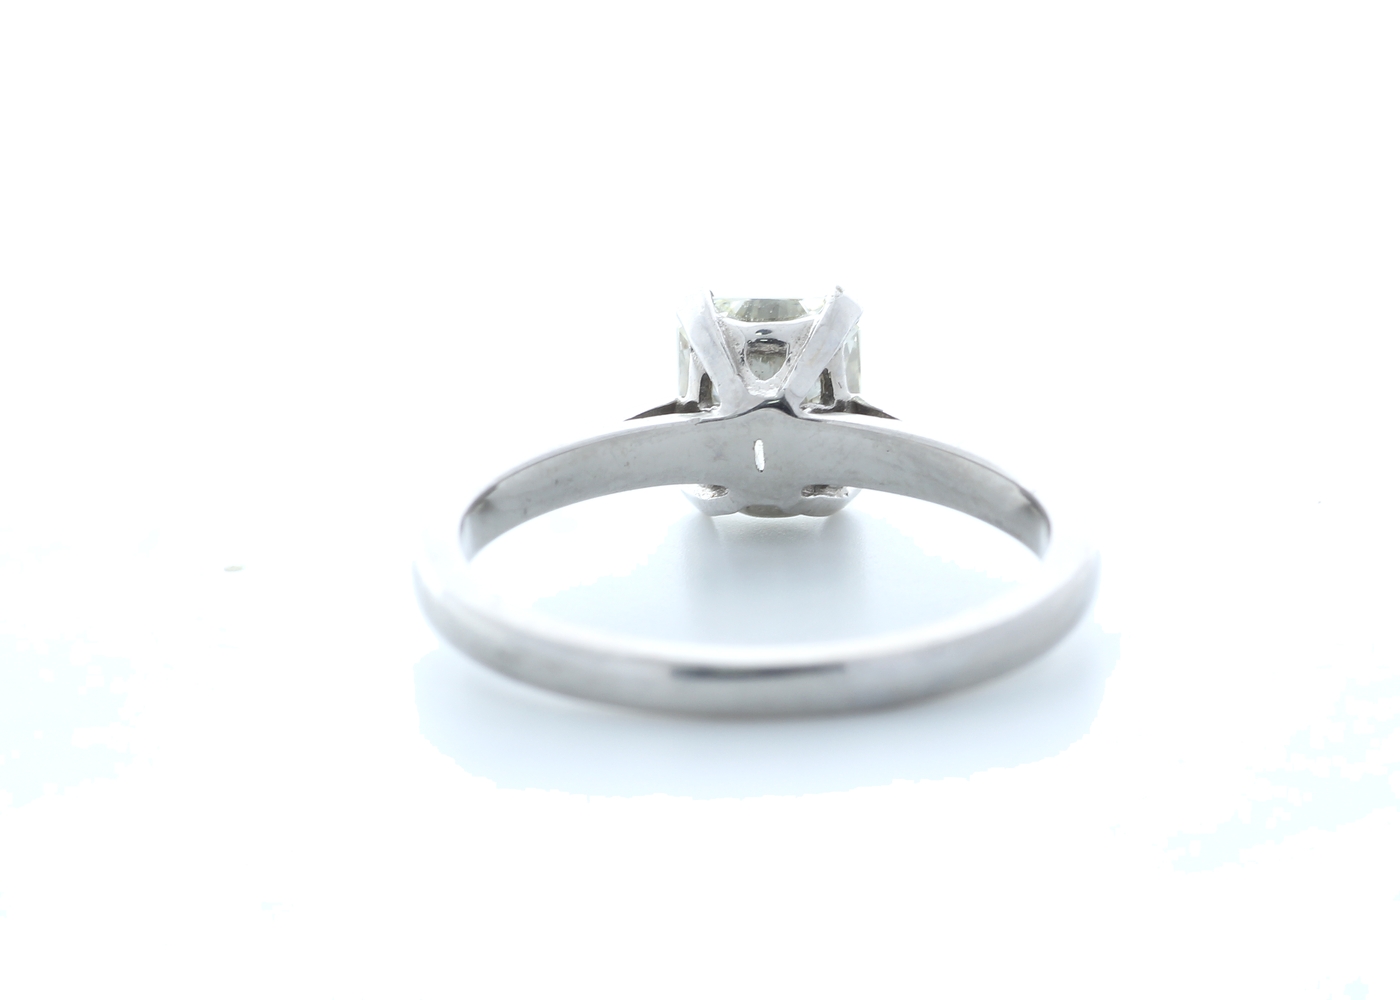 18ct White Gold Radiant Cut Diamond Ring 1.36 (1.19) Carats - Image 3 of 5